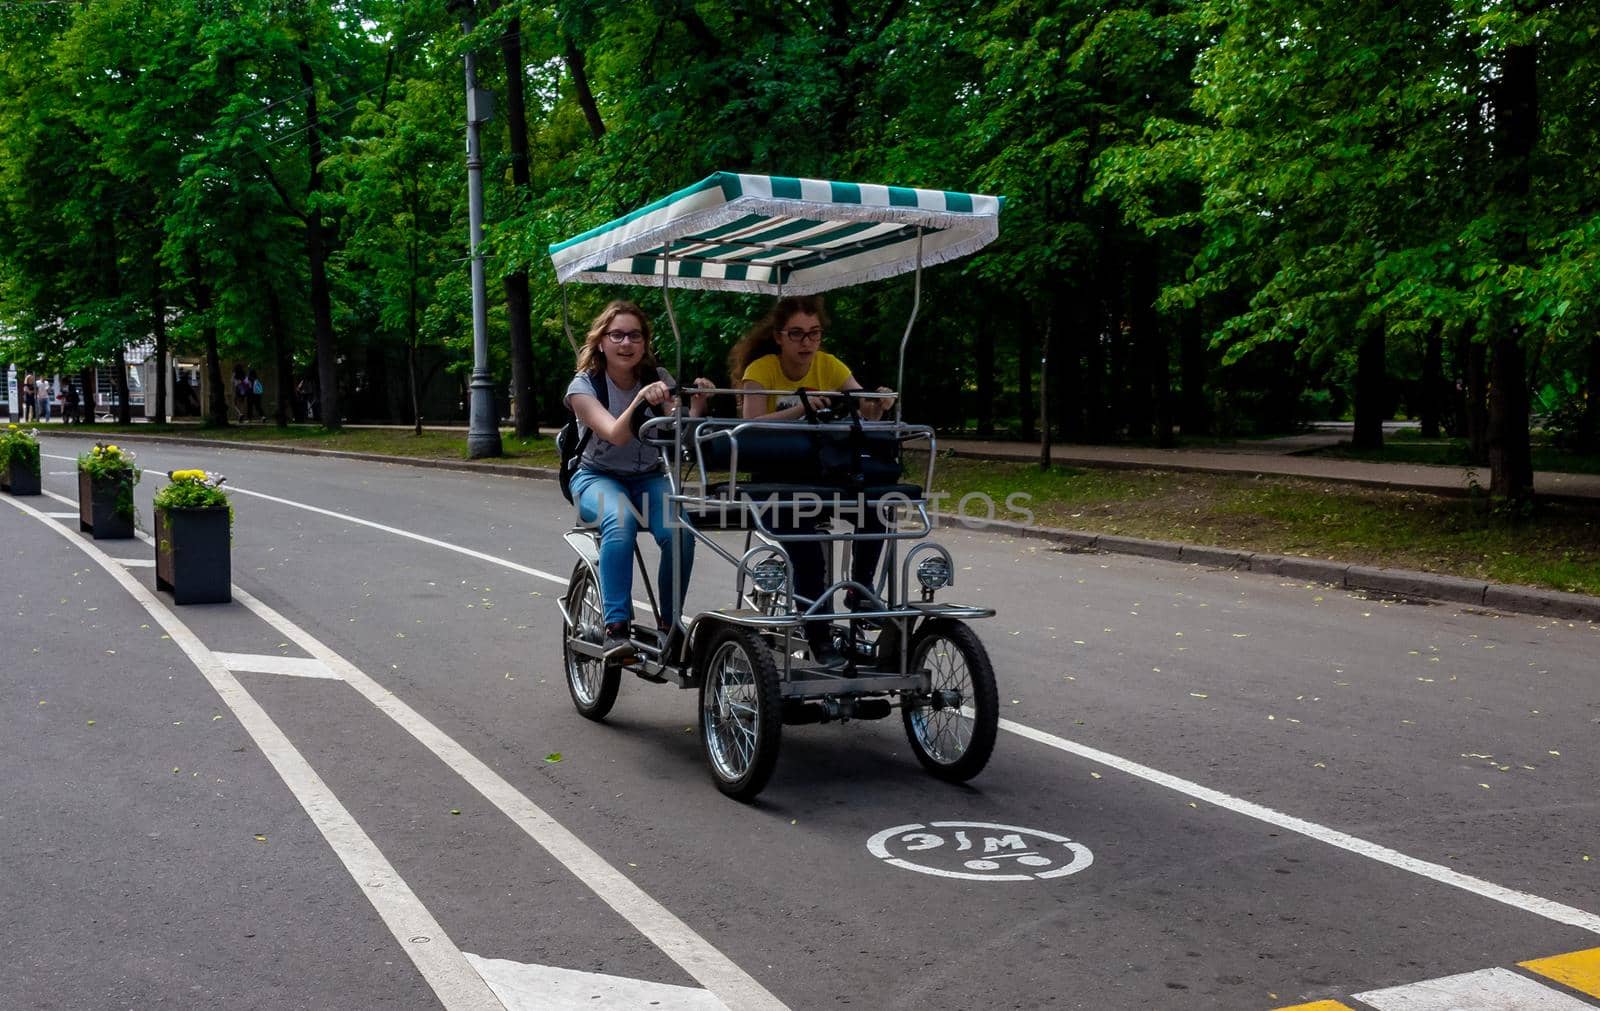 May 30, 2019, Moscow, Russia. Two girls ride a cycle rickshaw in Soklniki Park in Moscow.